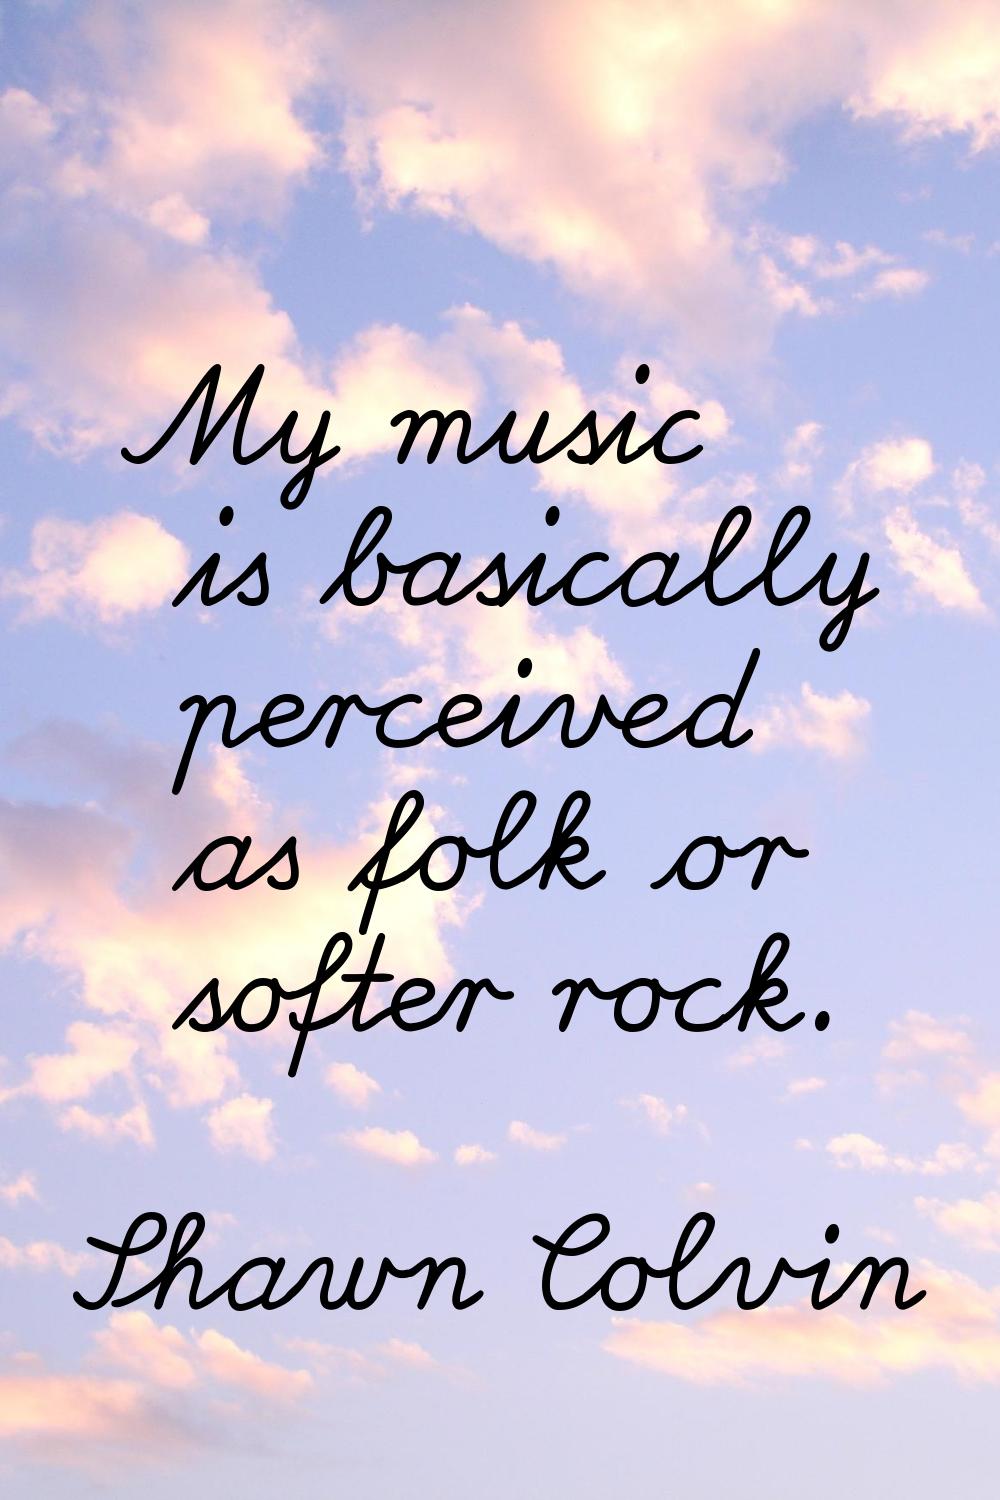 My music is basically perceived as folk or softer rock.